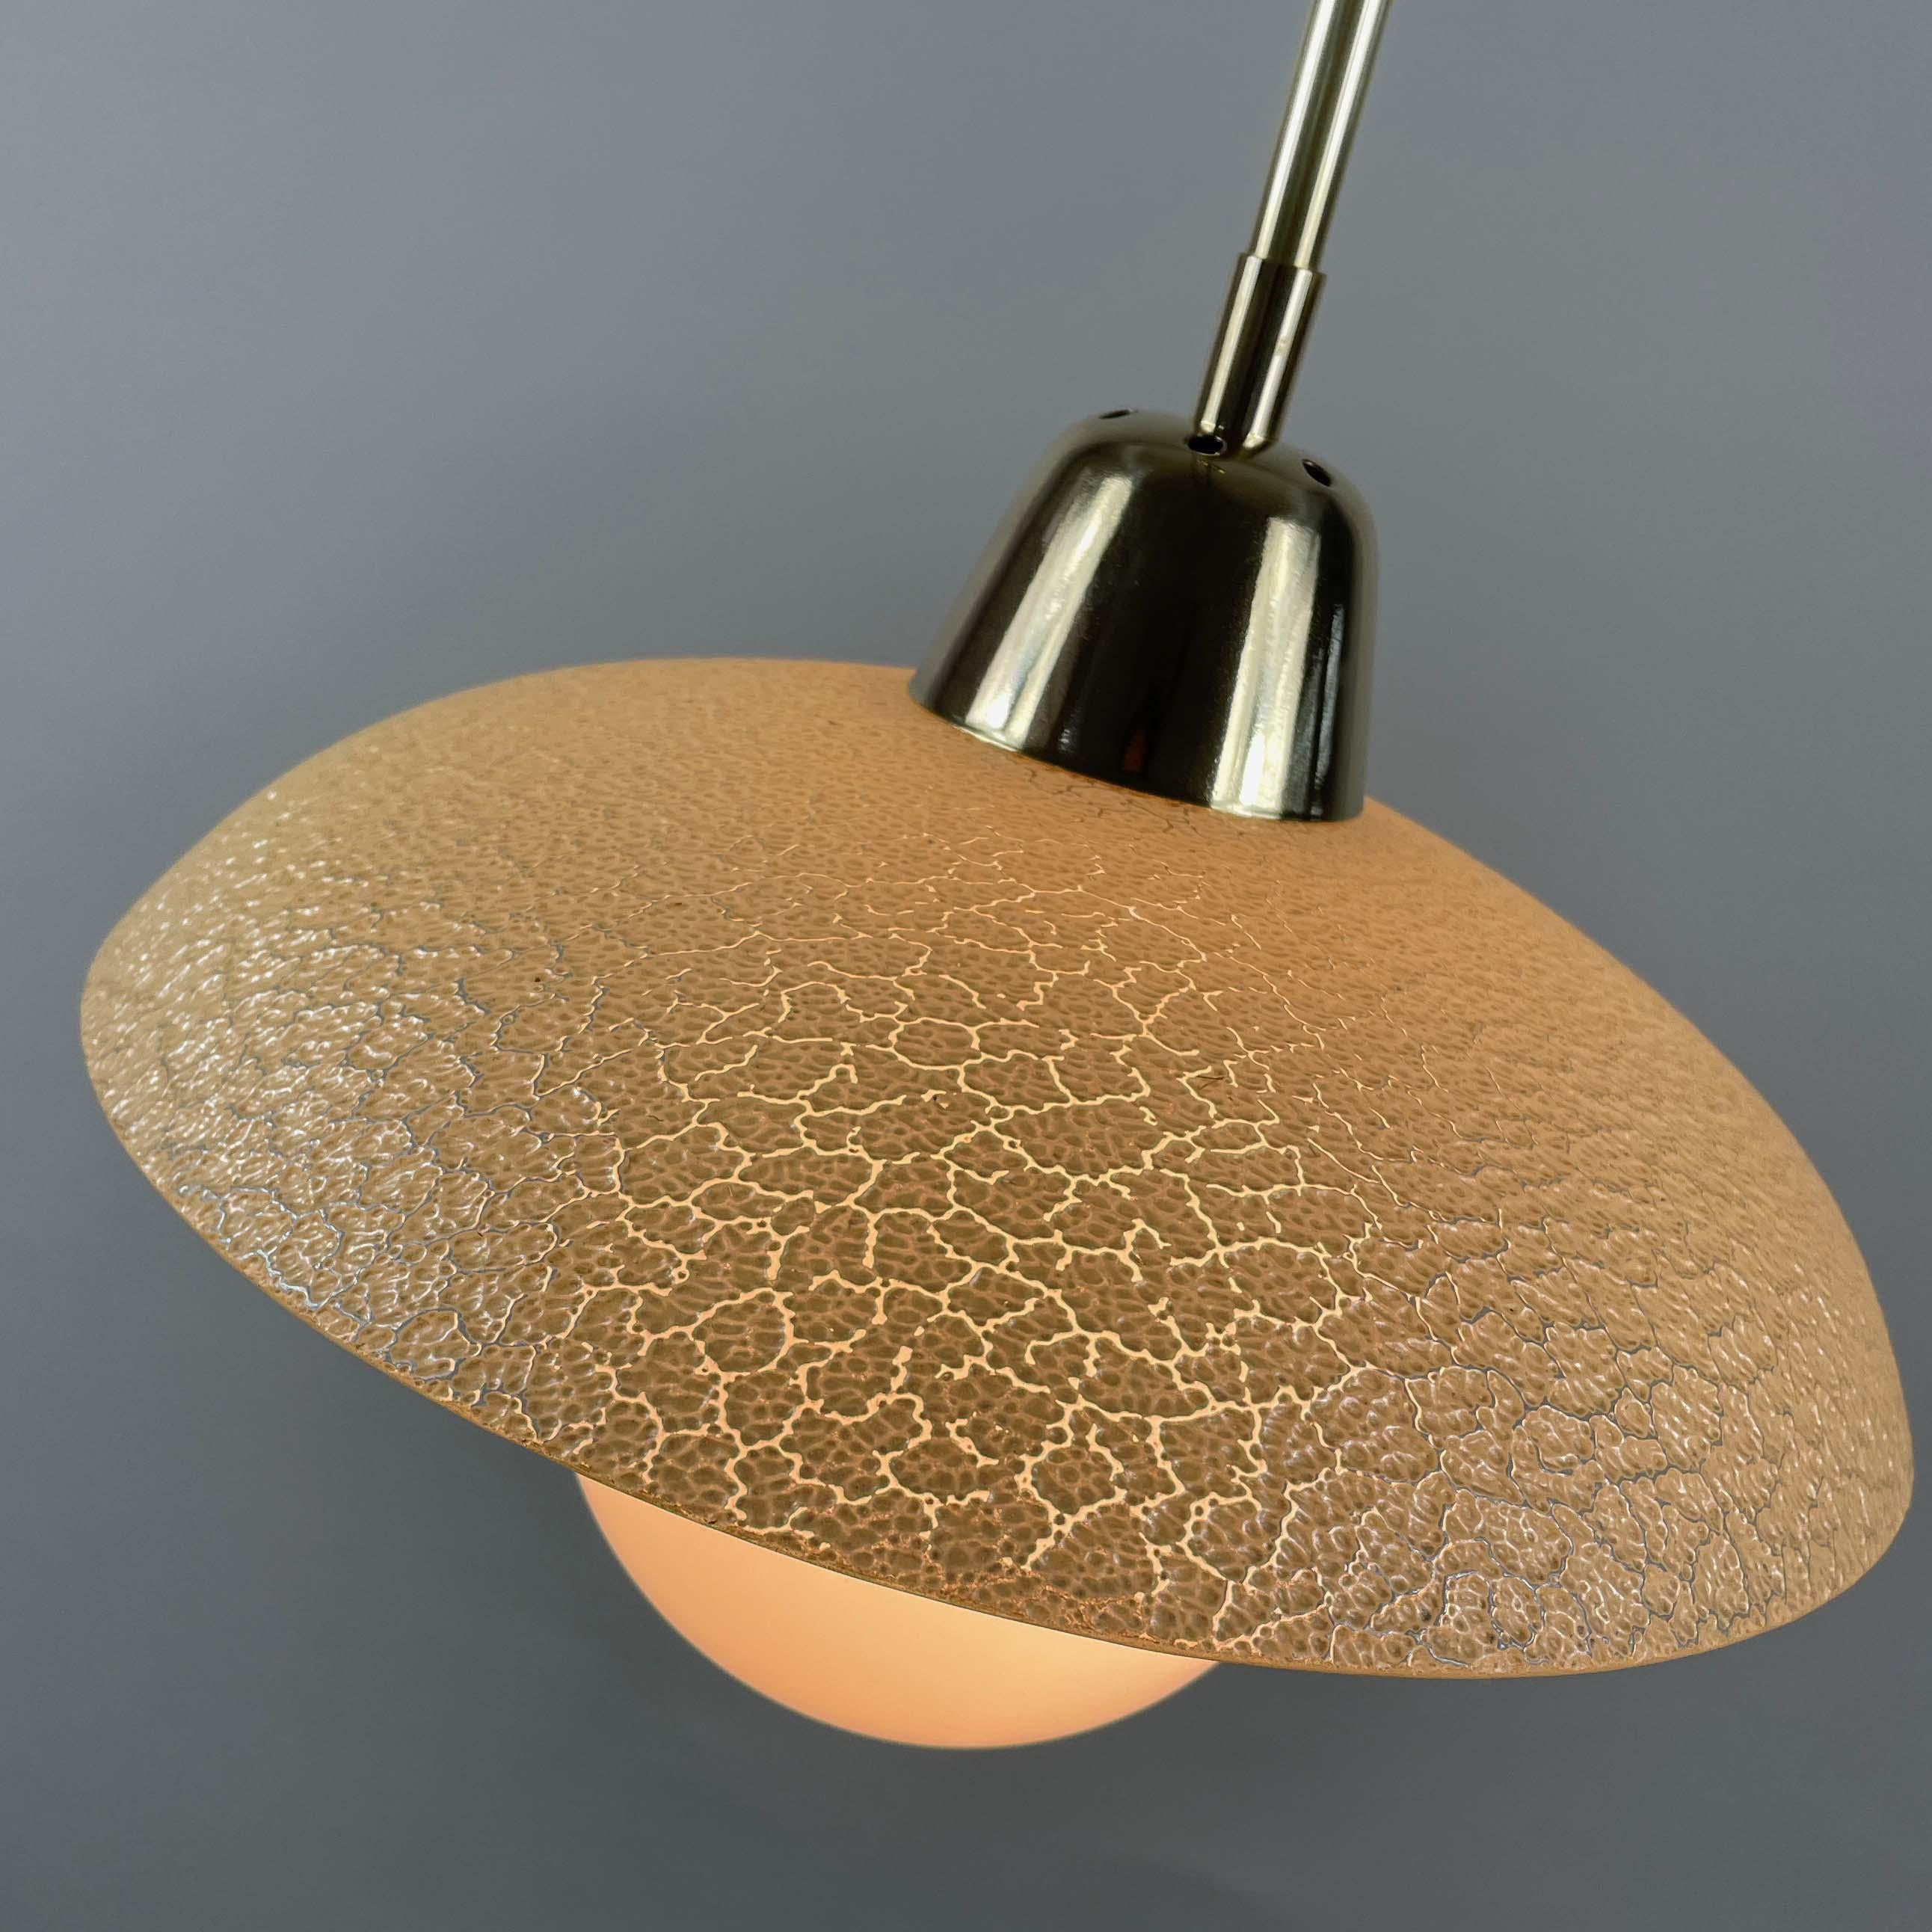 Cream Textured Glass and Brass Pendants, Sweden 1940s to 1950s For Sale 6